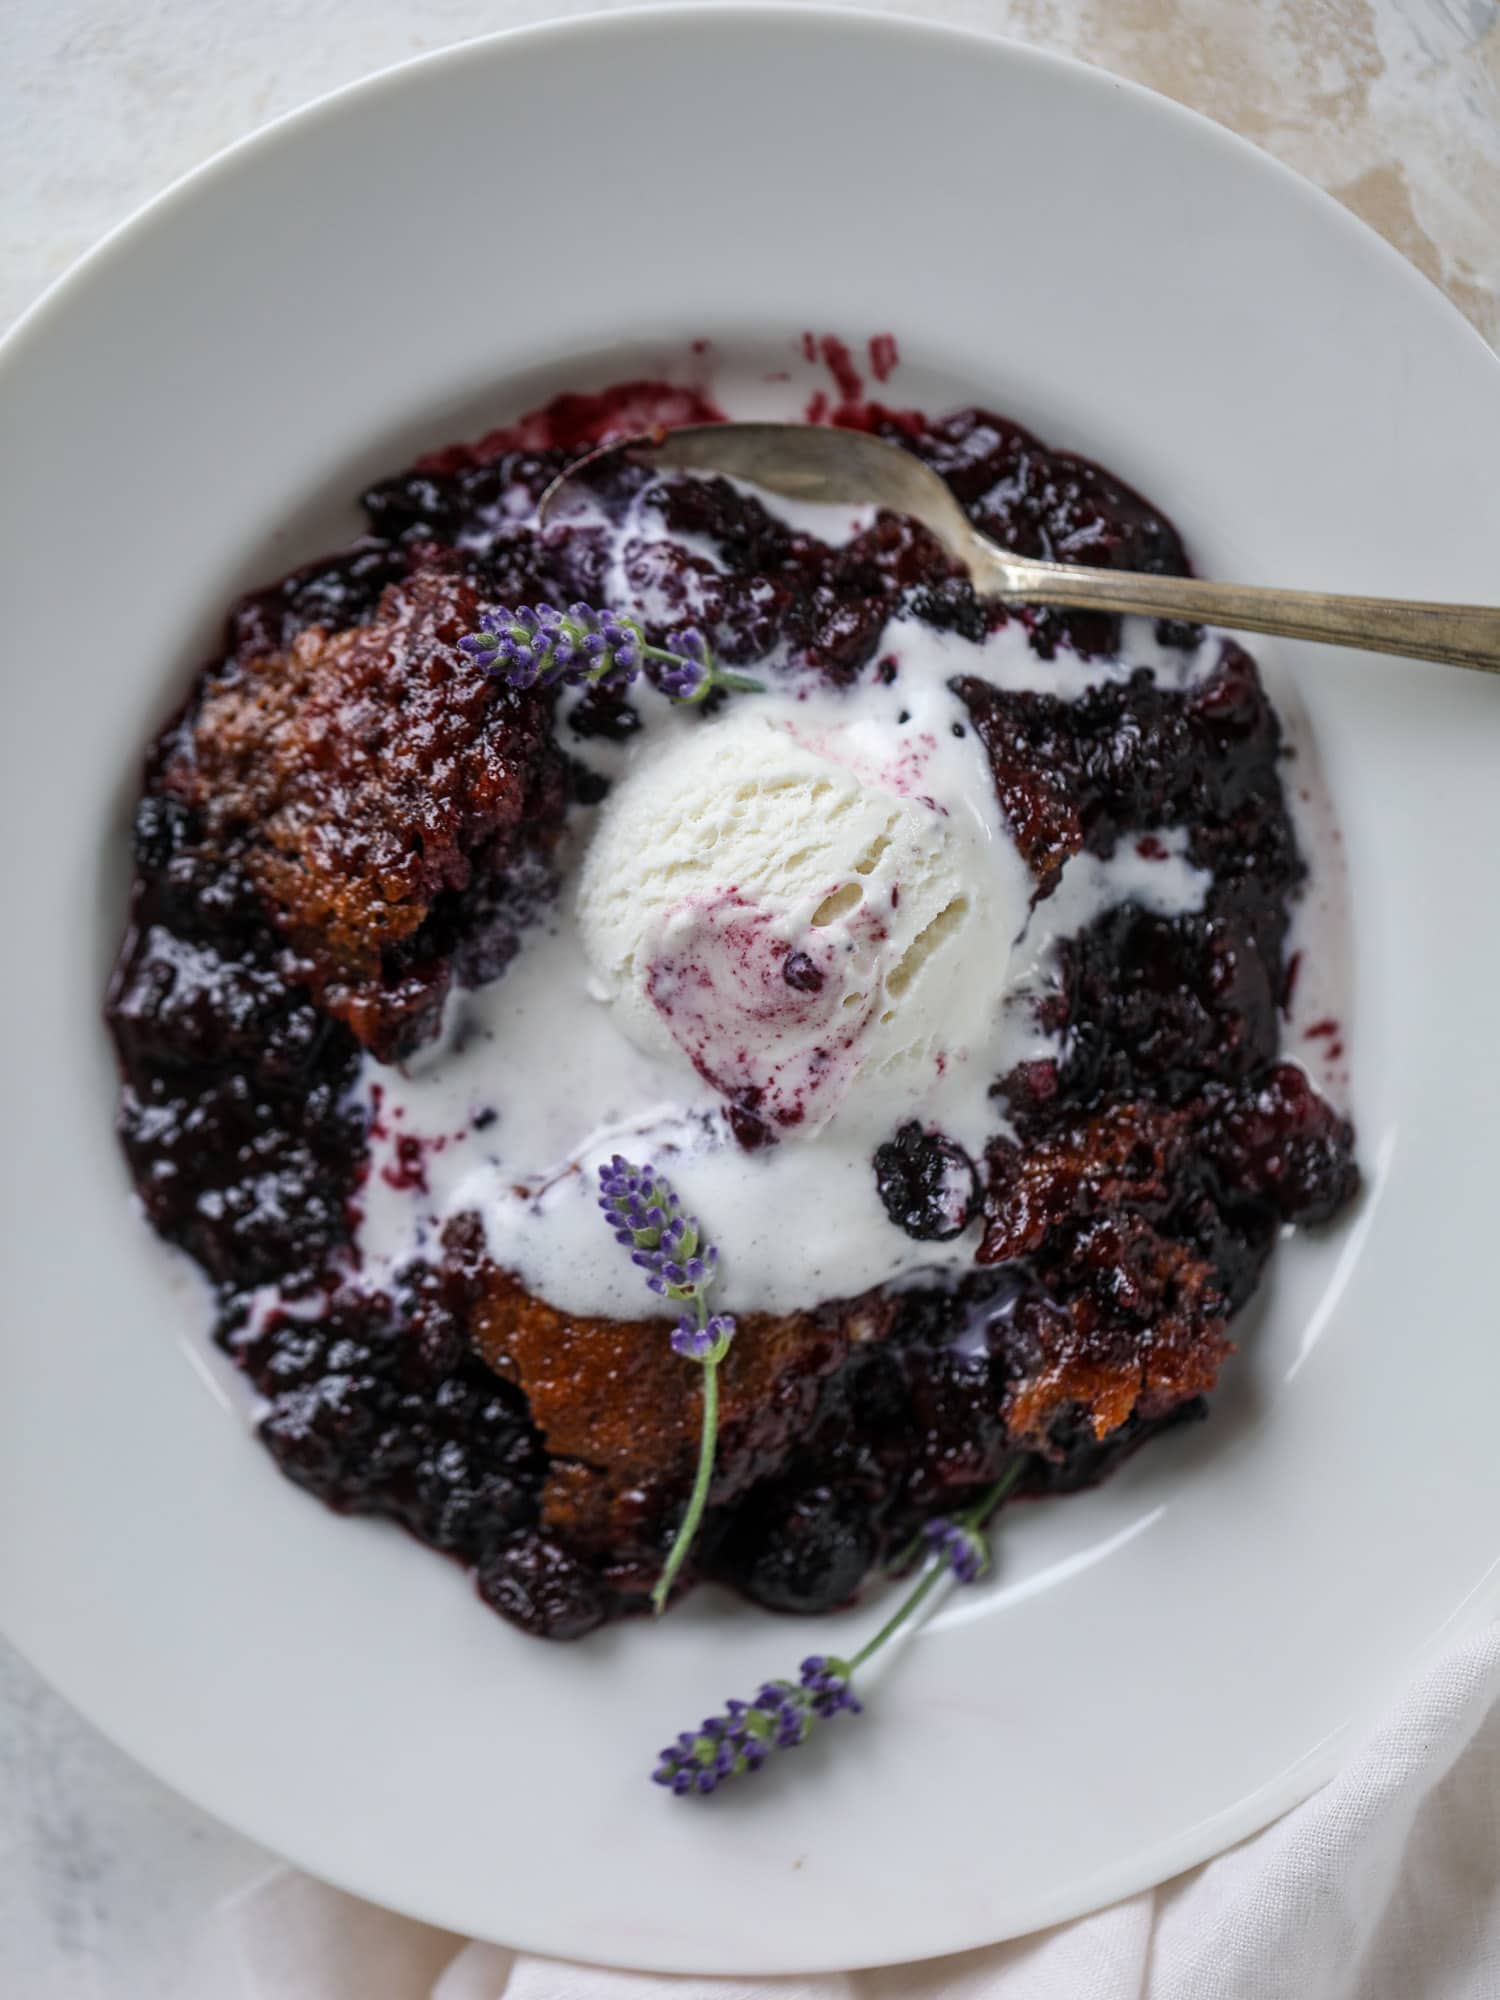 This black raspberry cobbler is a summer dream come true! The bursting black raspberries are rich and sweet, then add in a touch of lavender for incredible flavor and you're all set. The cobbler cake topping is perfect for vanilla ice cream. Win! I howsweeteats.com #black #raspberry #cobbler #lavender #summer #desserts #icecream